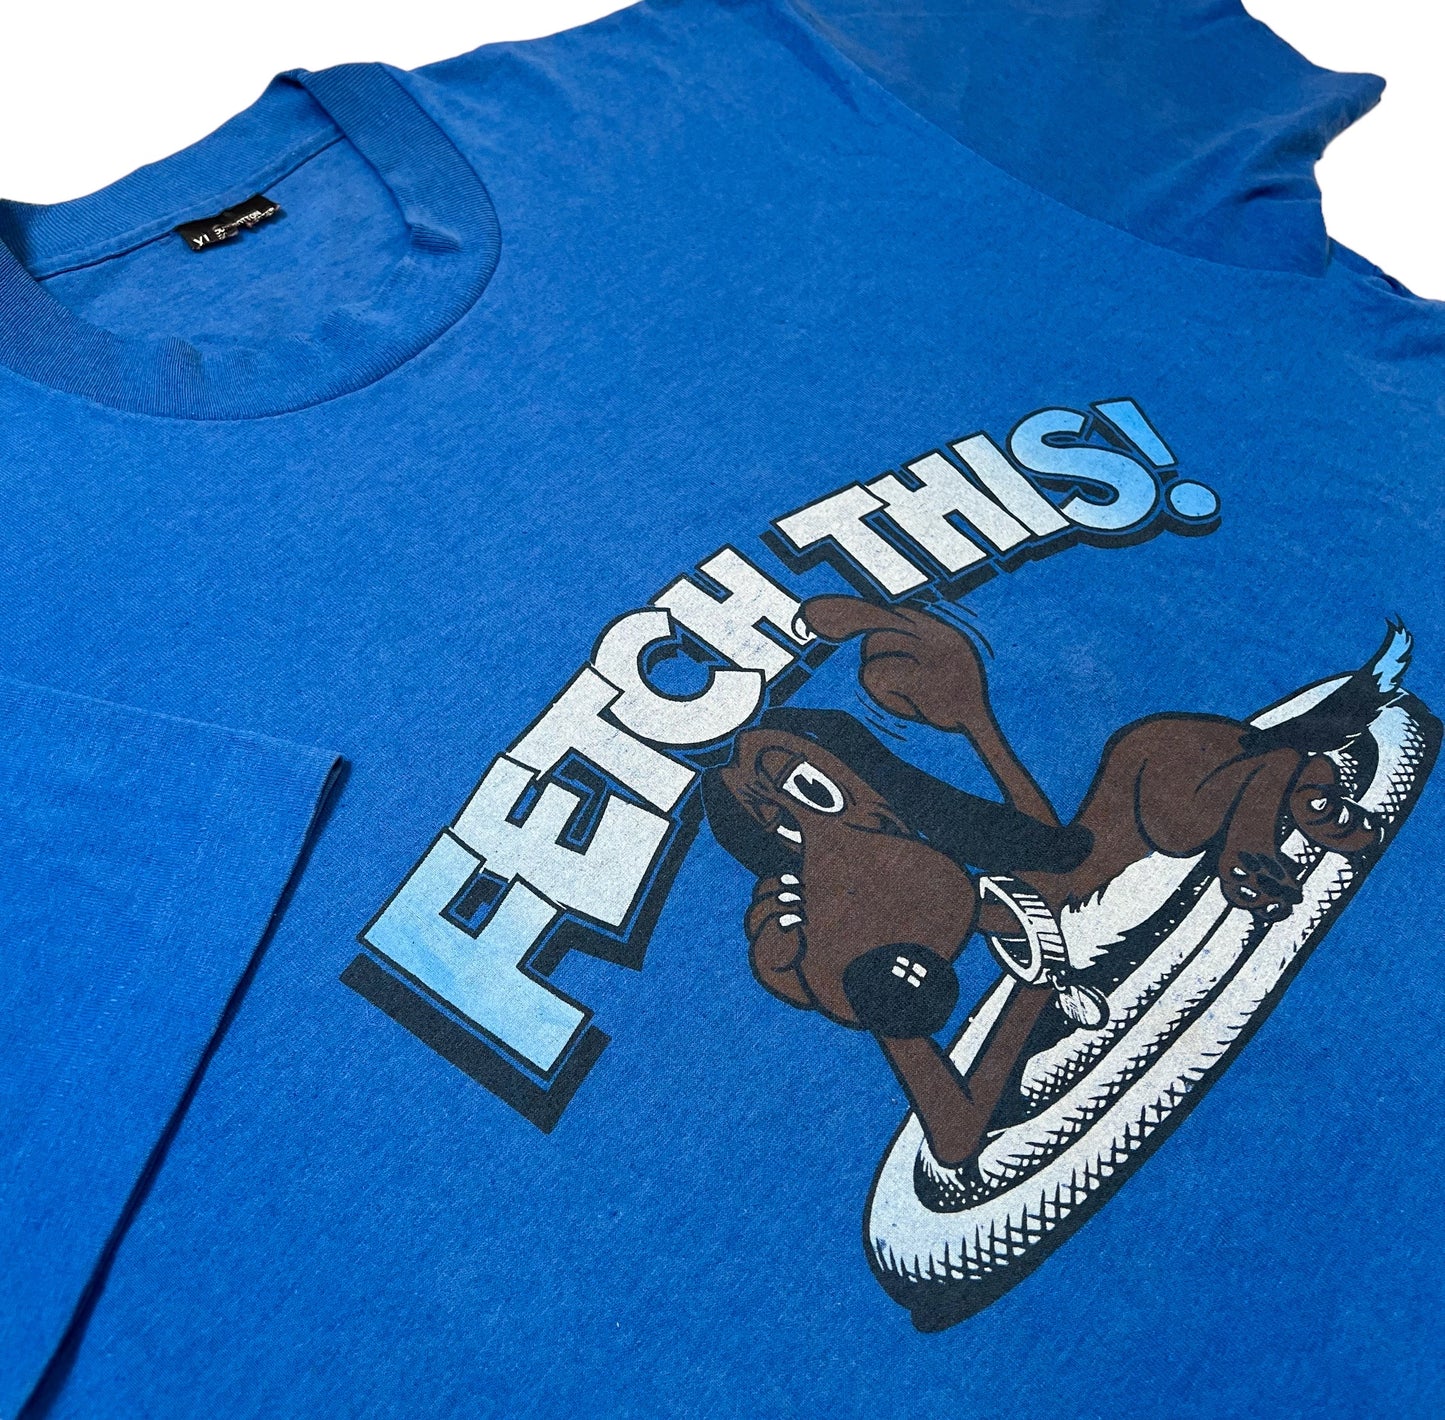 1980s "Fetch This!" Screen Stars graphic t-shirt